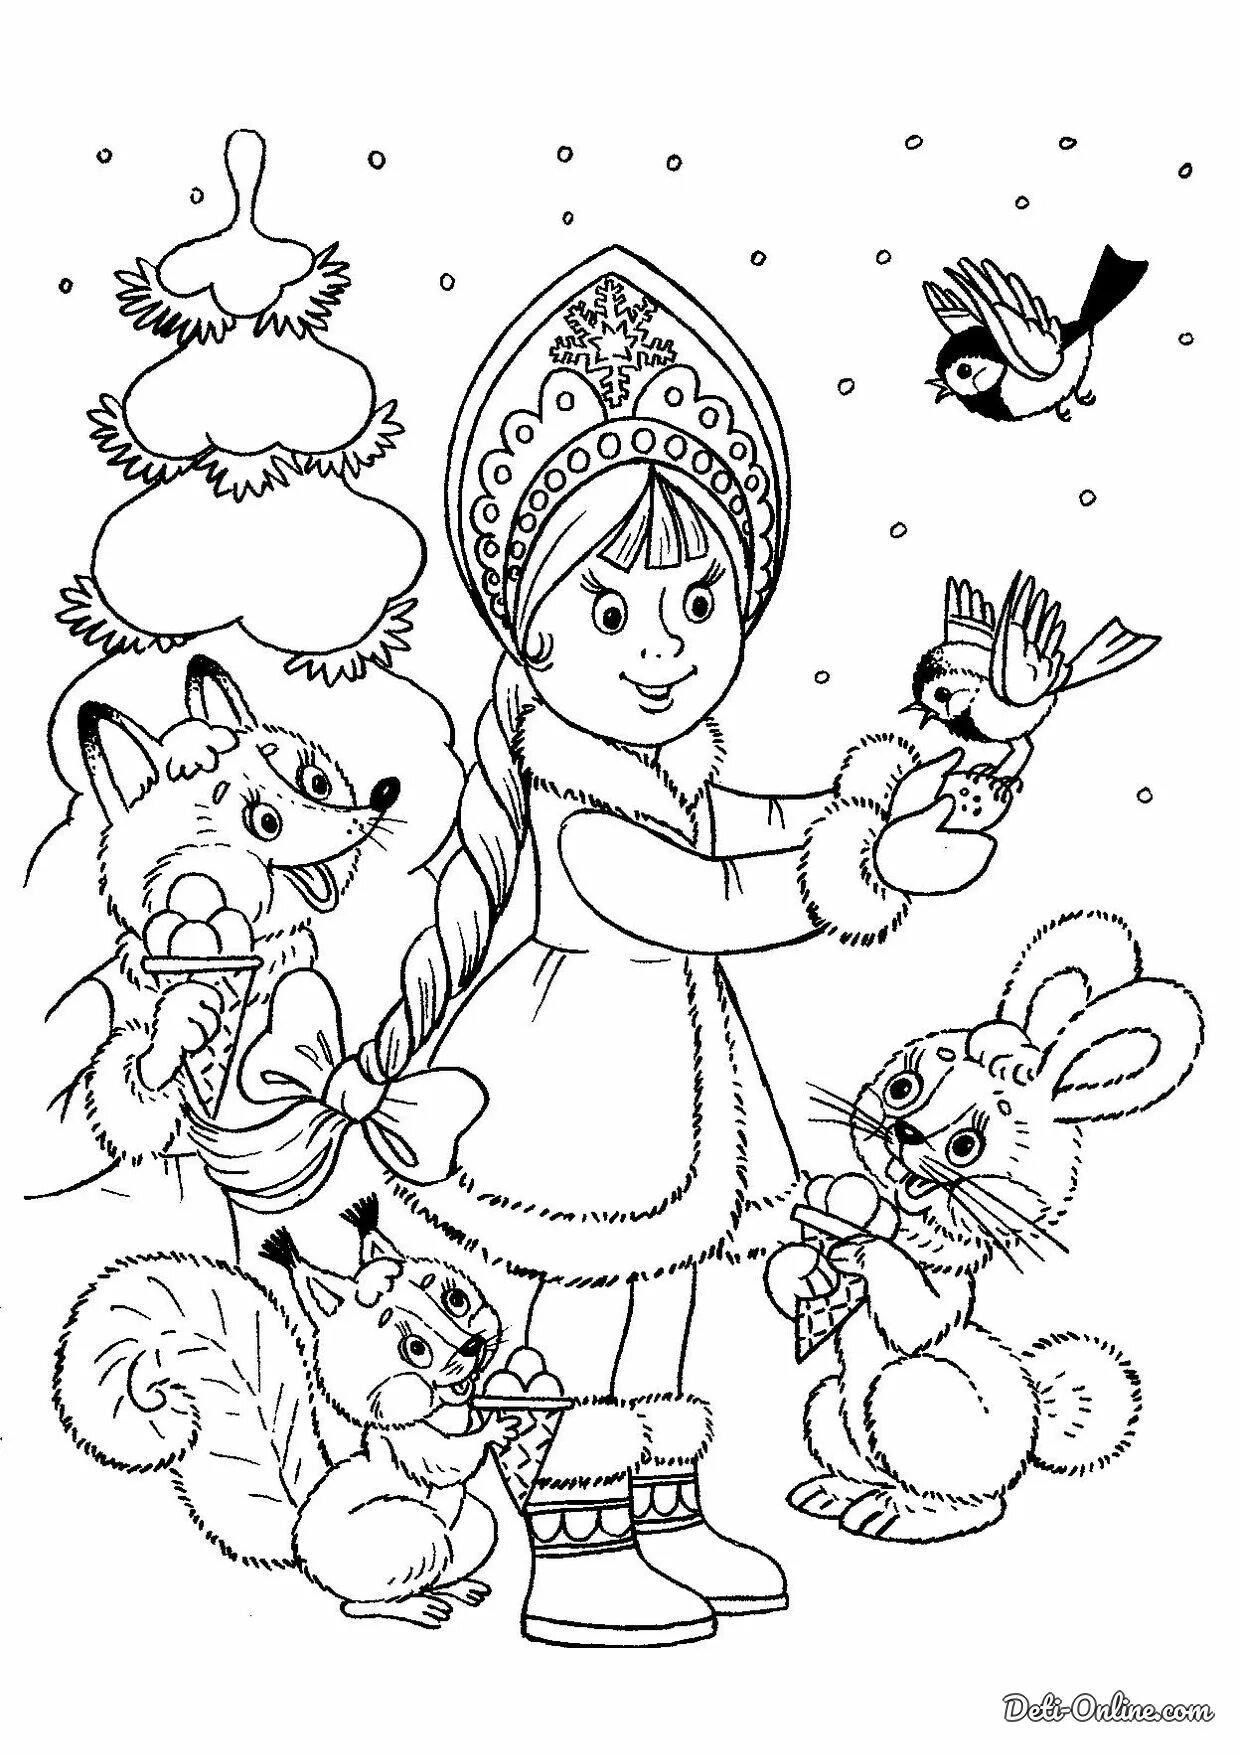 Snow Maiden glitter coloring book for girls